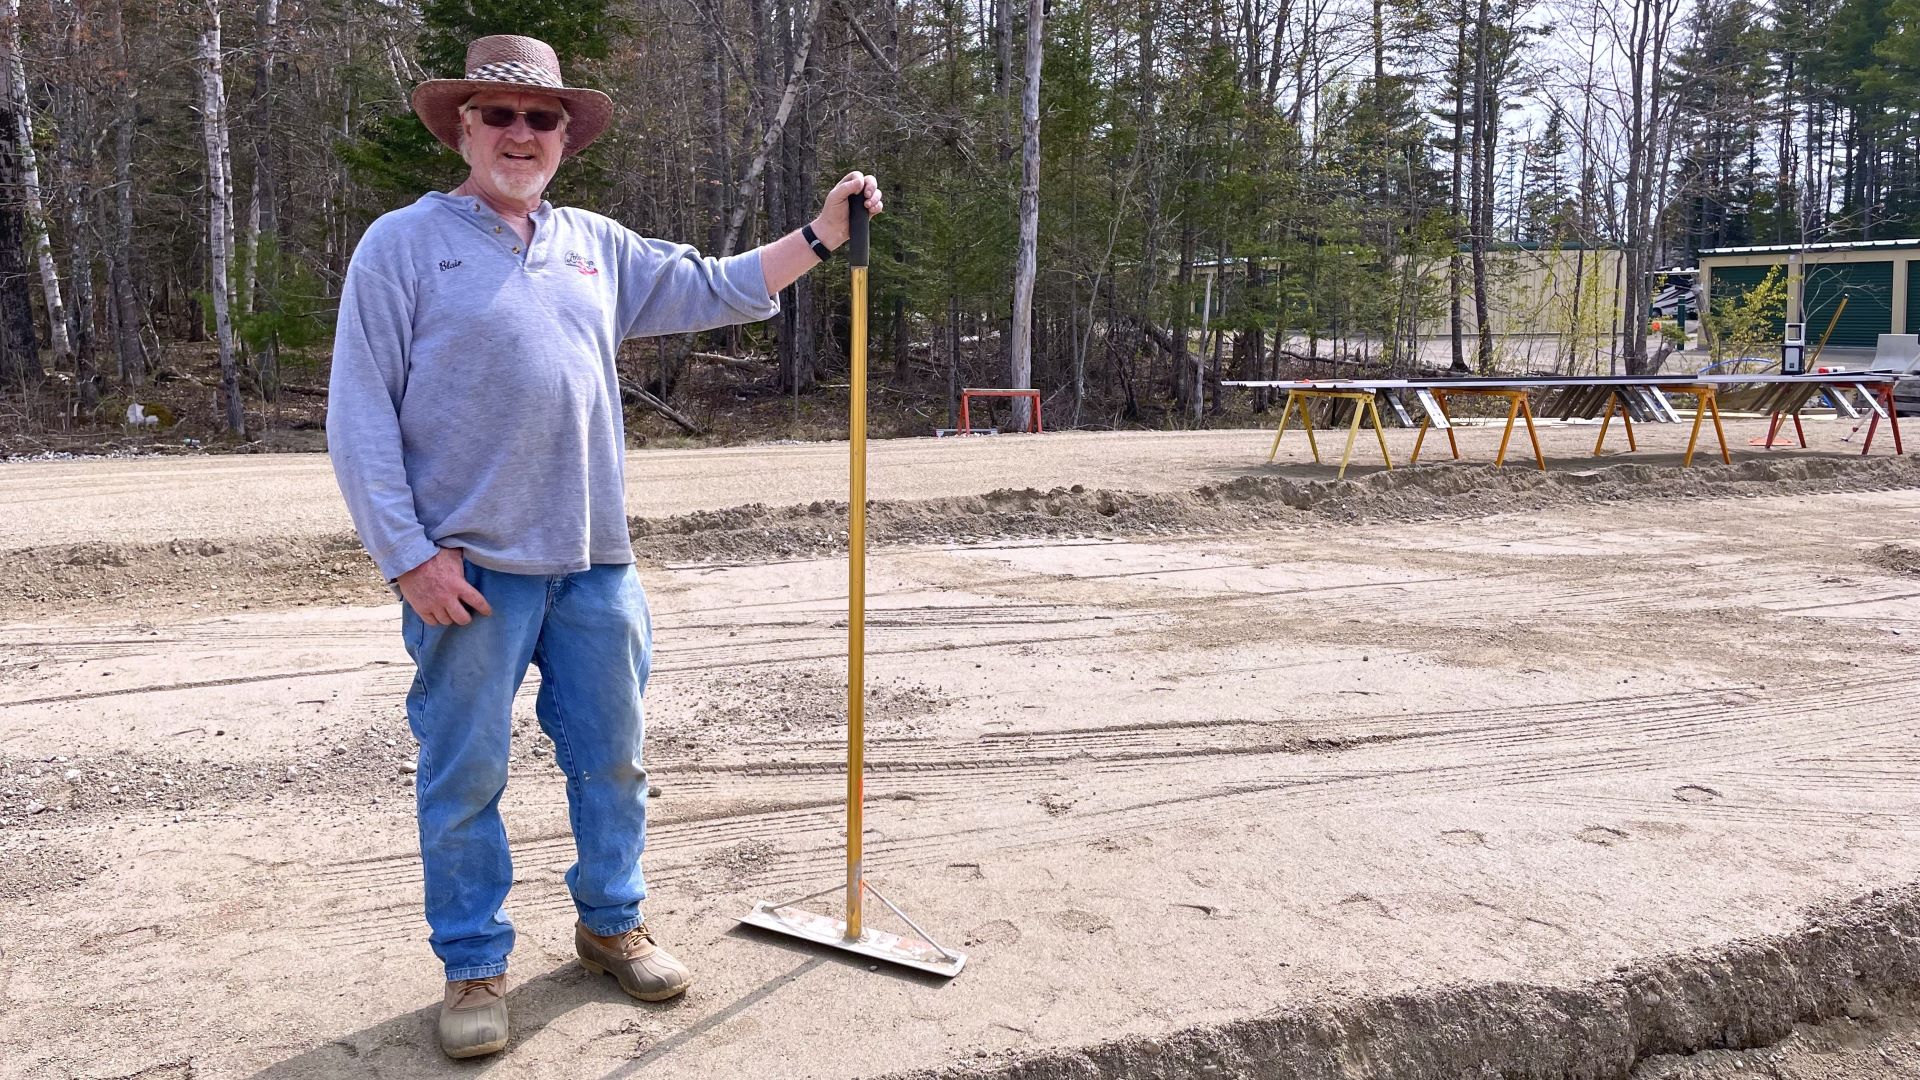 Blair West poses for a photo during a pause in grading his land to build another storage facility.